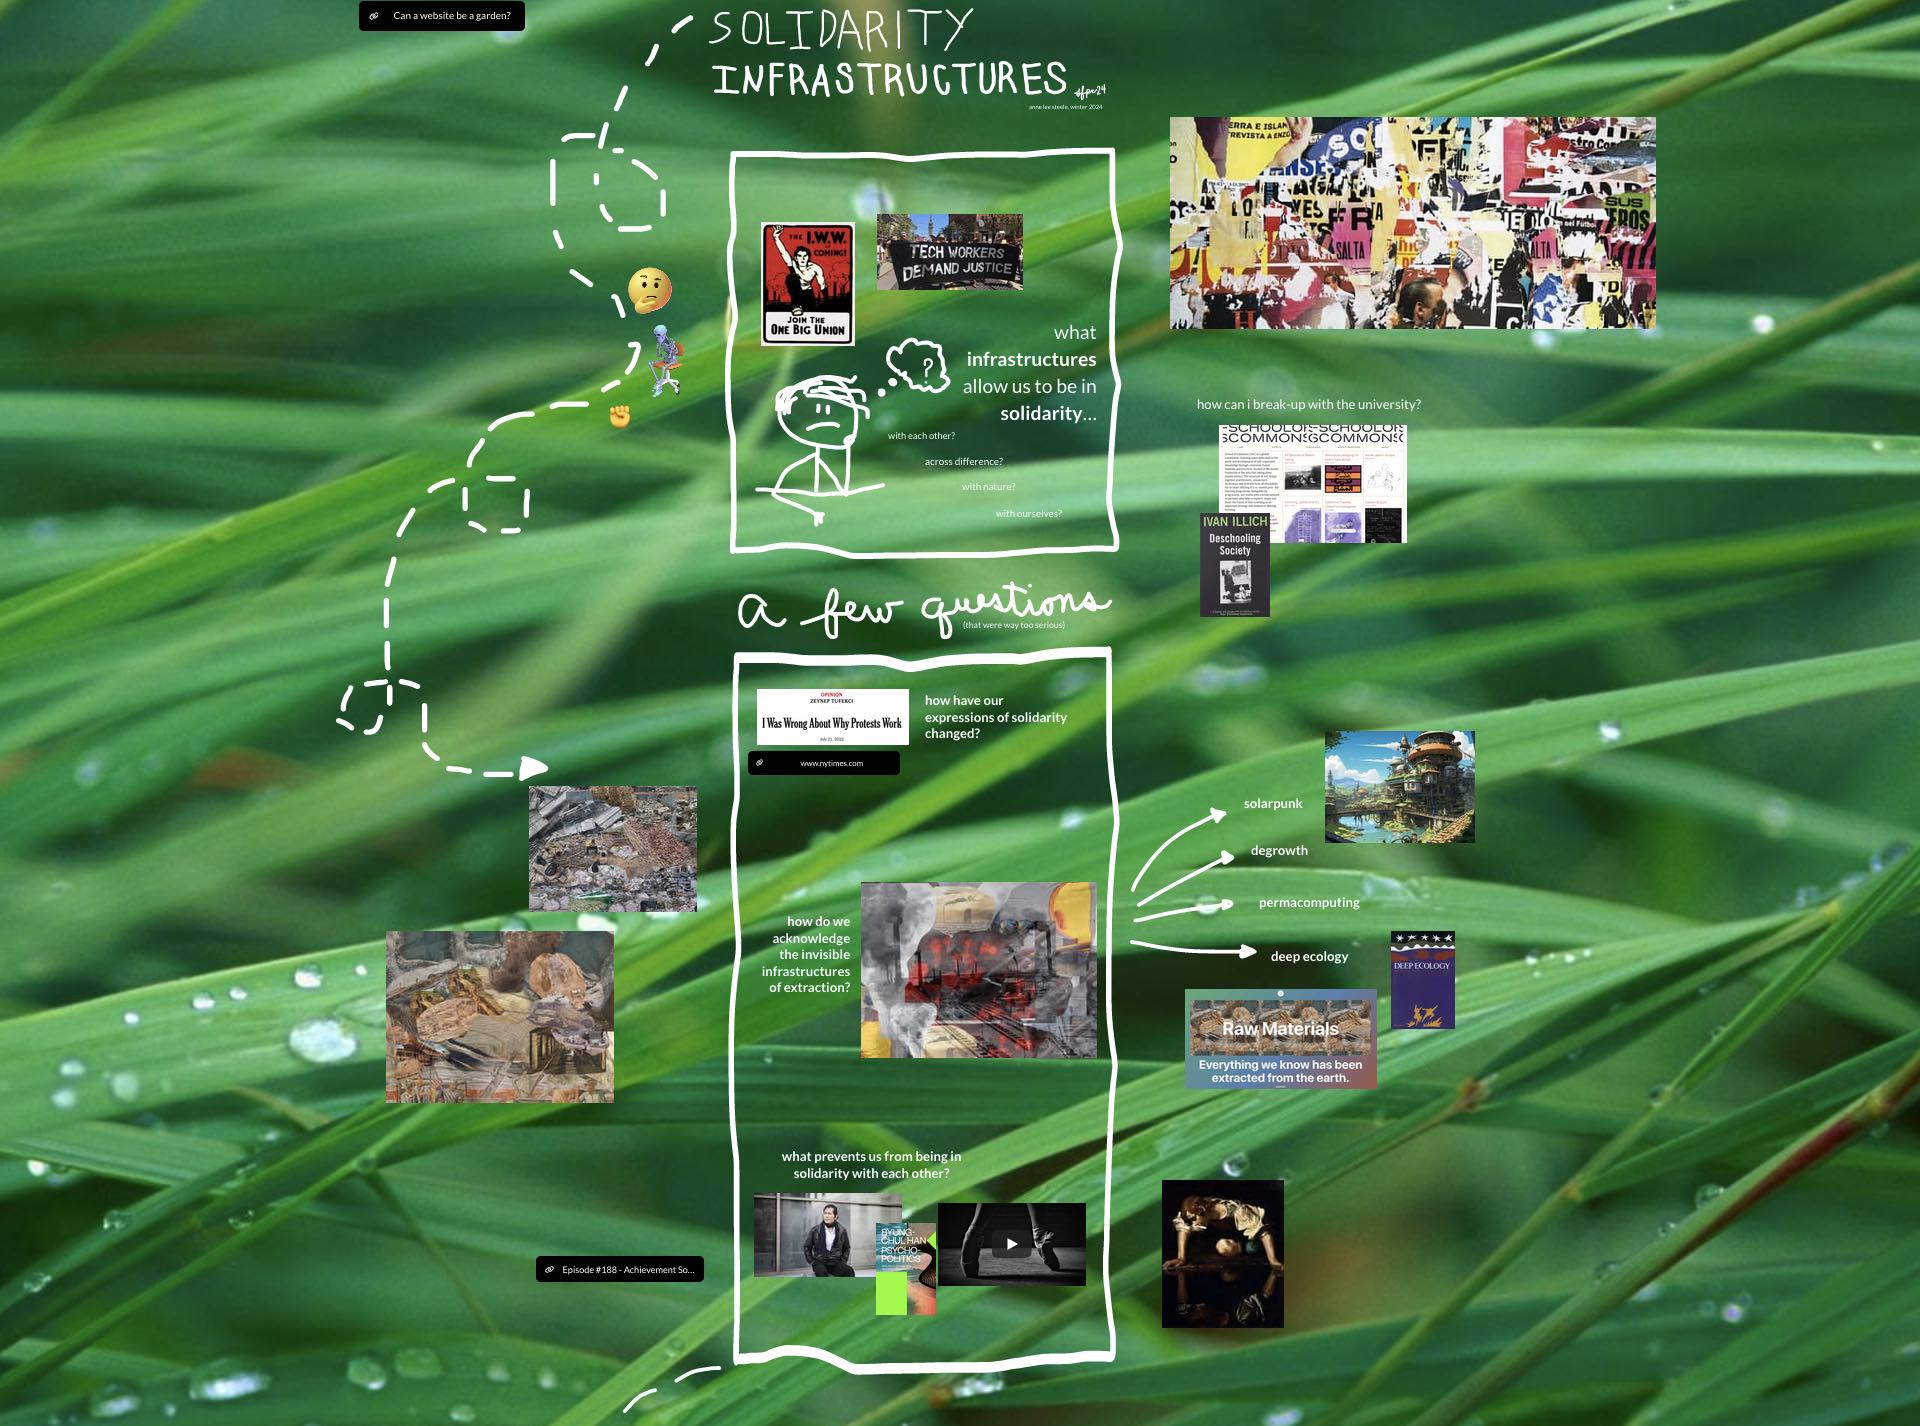 Alt: Screenshot of page with a grassy background, messily handrawn people with the question"what infrastructures allow us to be in solidarity?" dominating the screen. There are snapshots of pictures, and of graphs pointing towards ideas and alternatives.